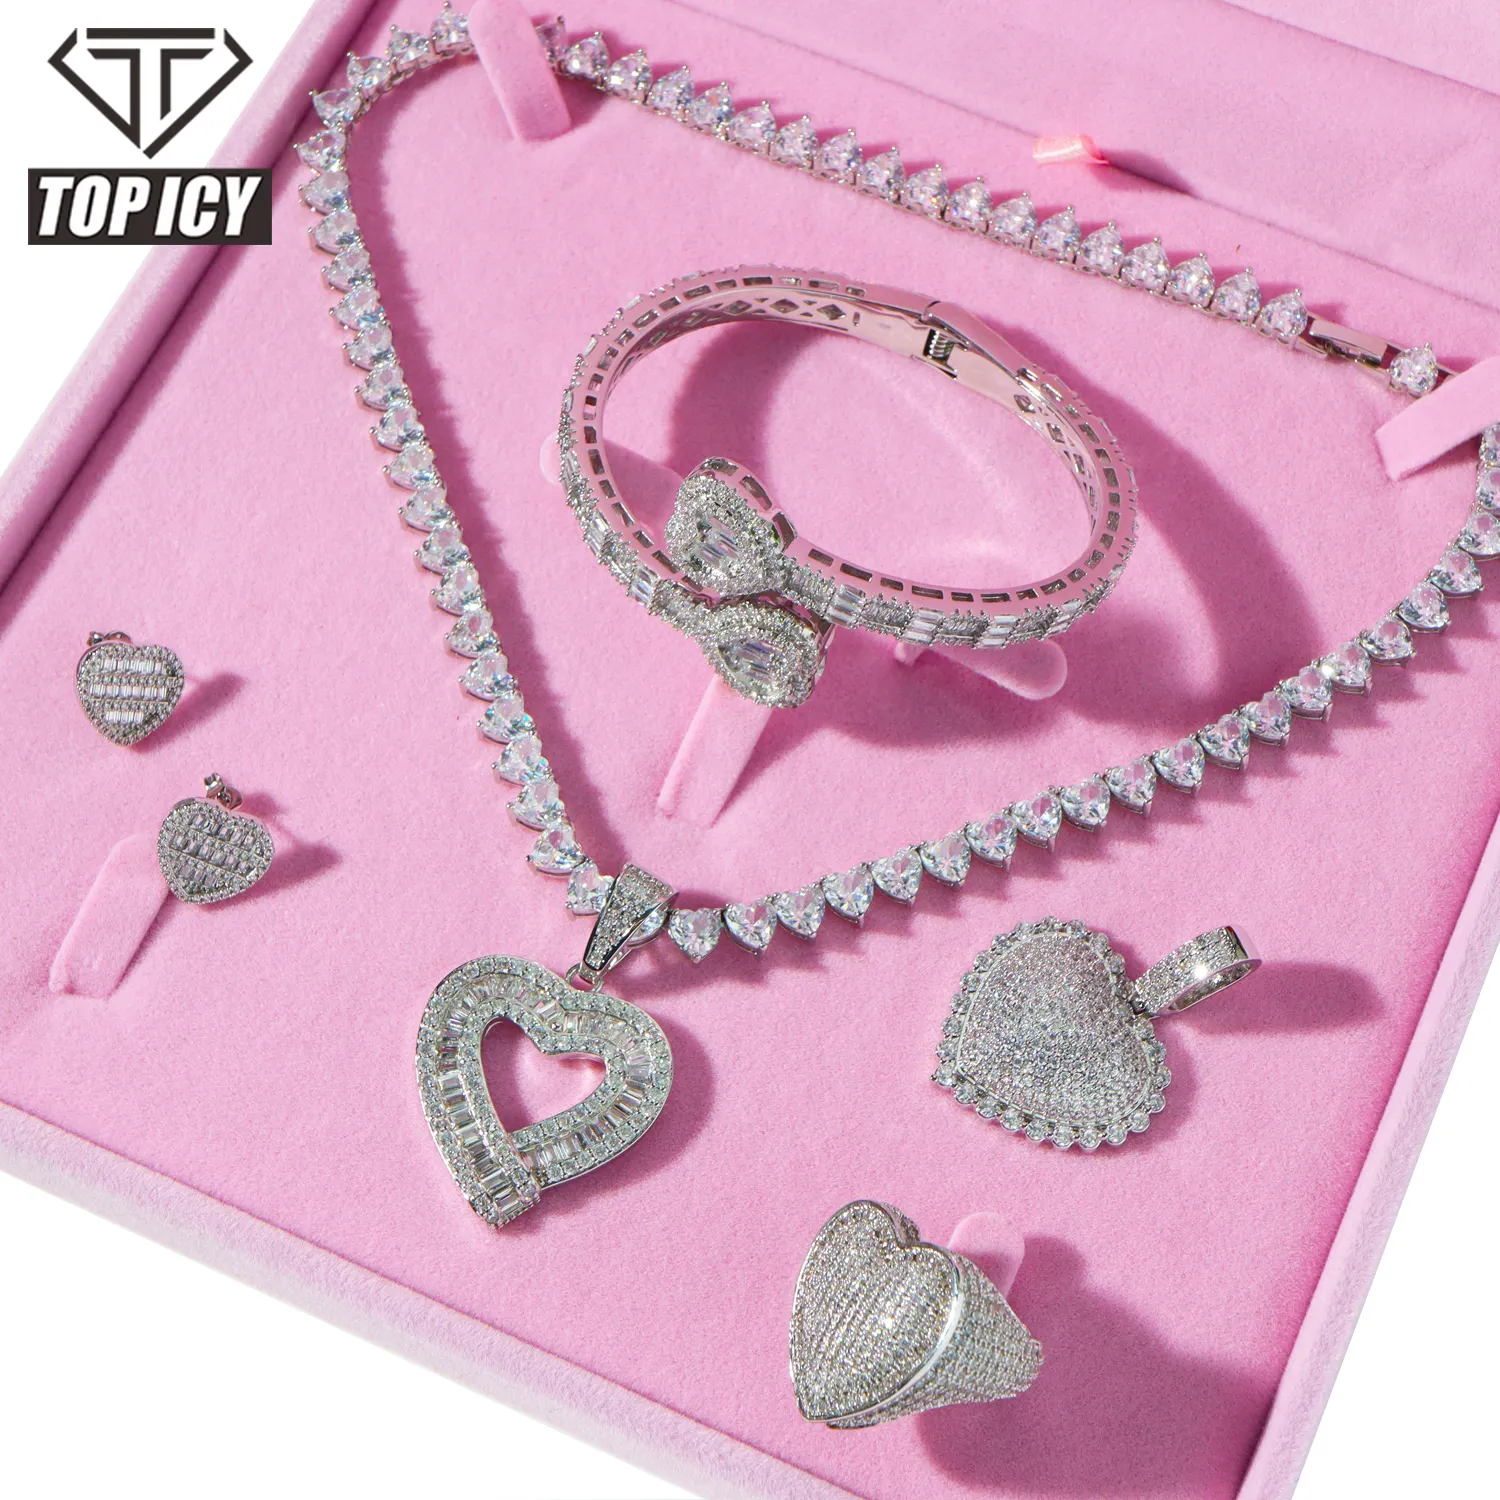 Icy iced out heart design love style women jewelry set cz bling bling iced out heart baguette bangle earring pendant jewelry set